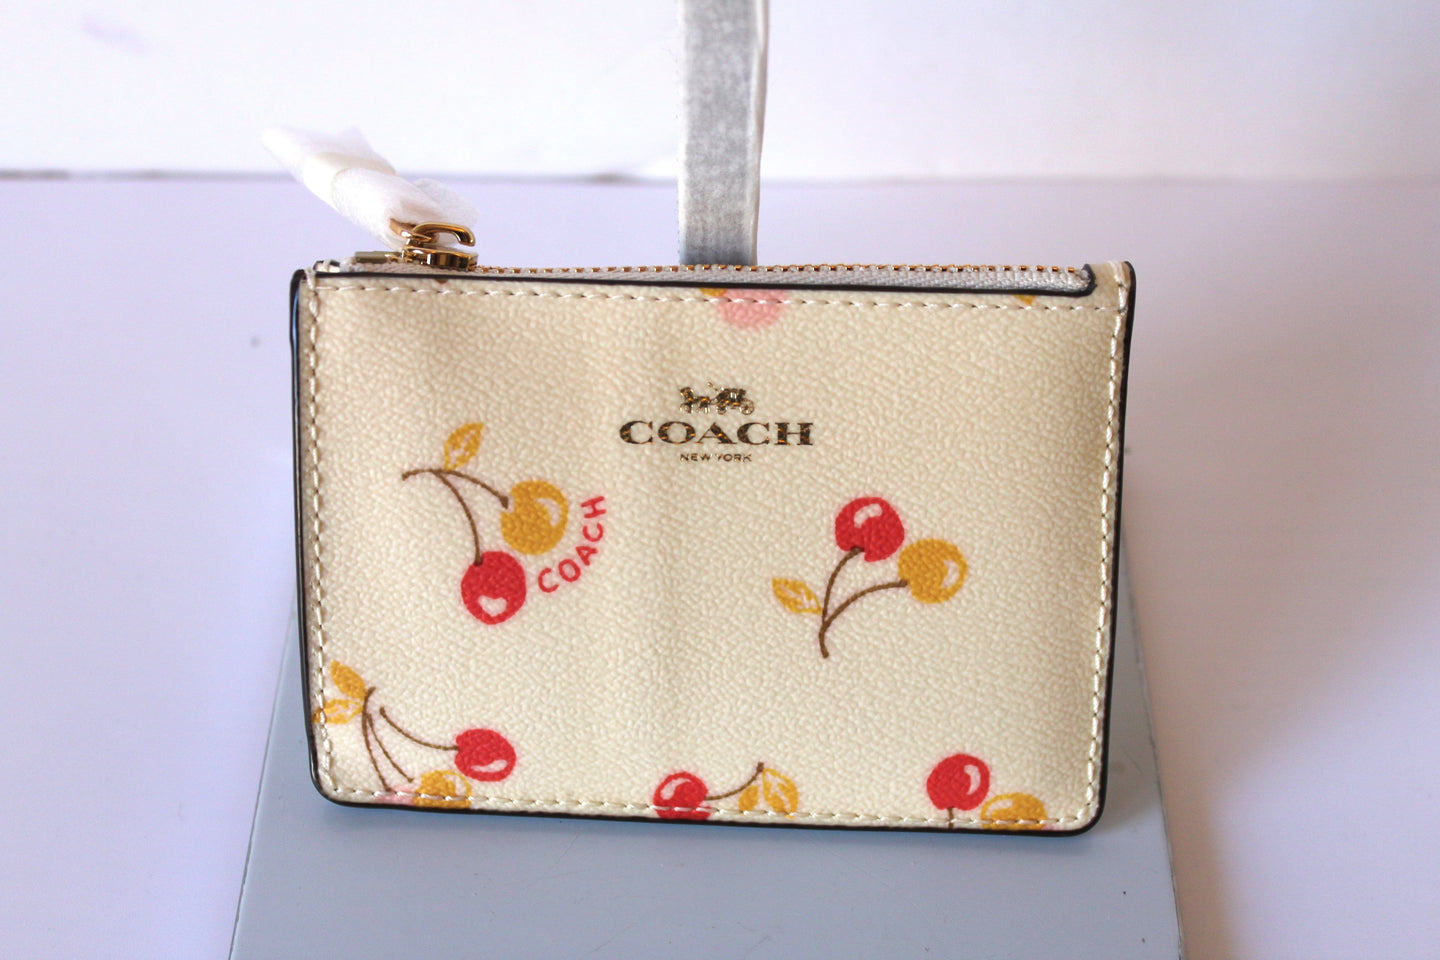 Handbags- Leather wallet/keychain by Coach - Cream w/pink and yellow cherry pattern HB023